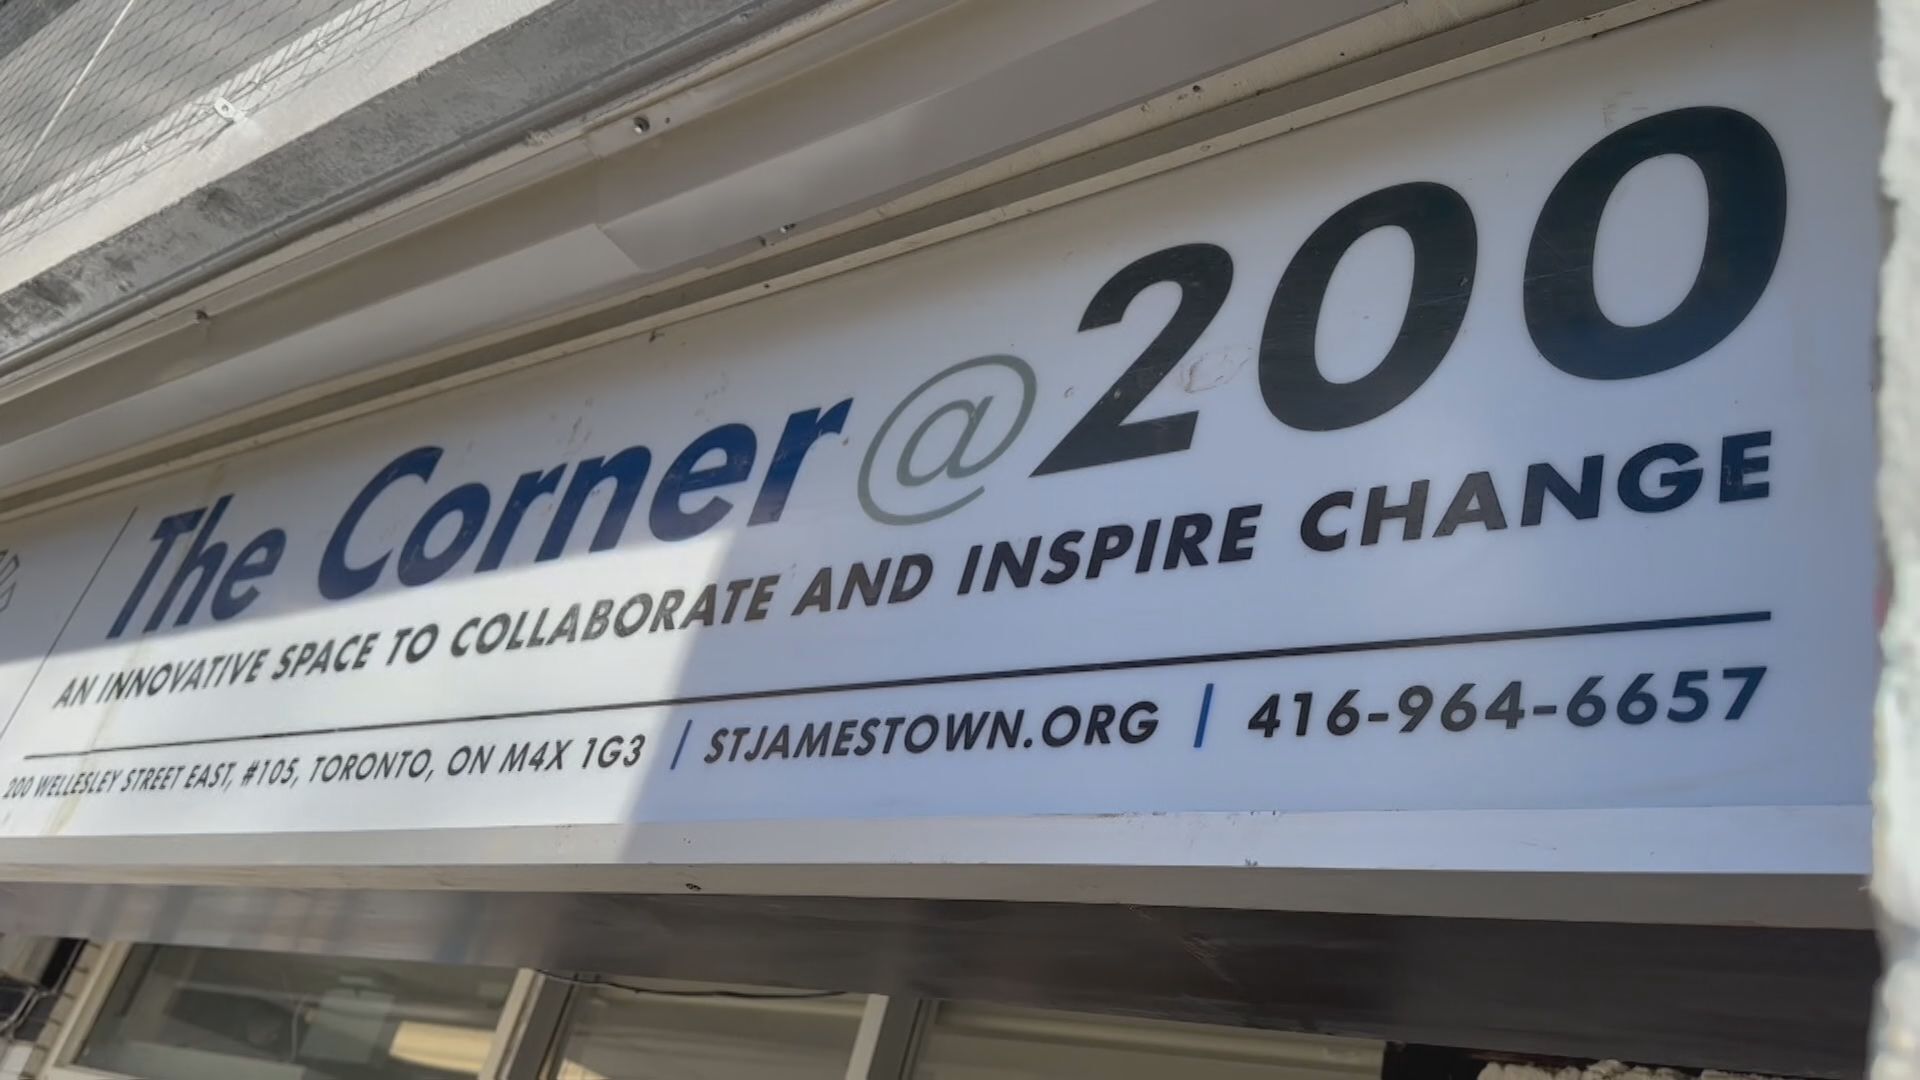 'The Corner' in St. James Town offers wide variety of programming